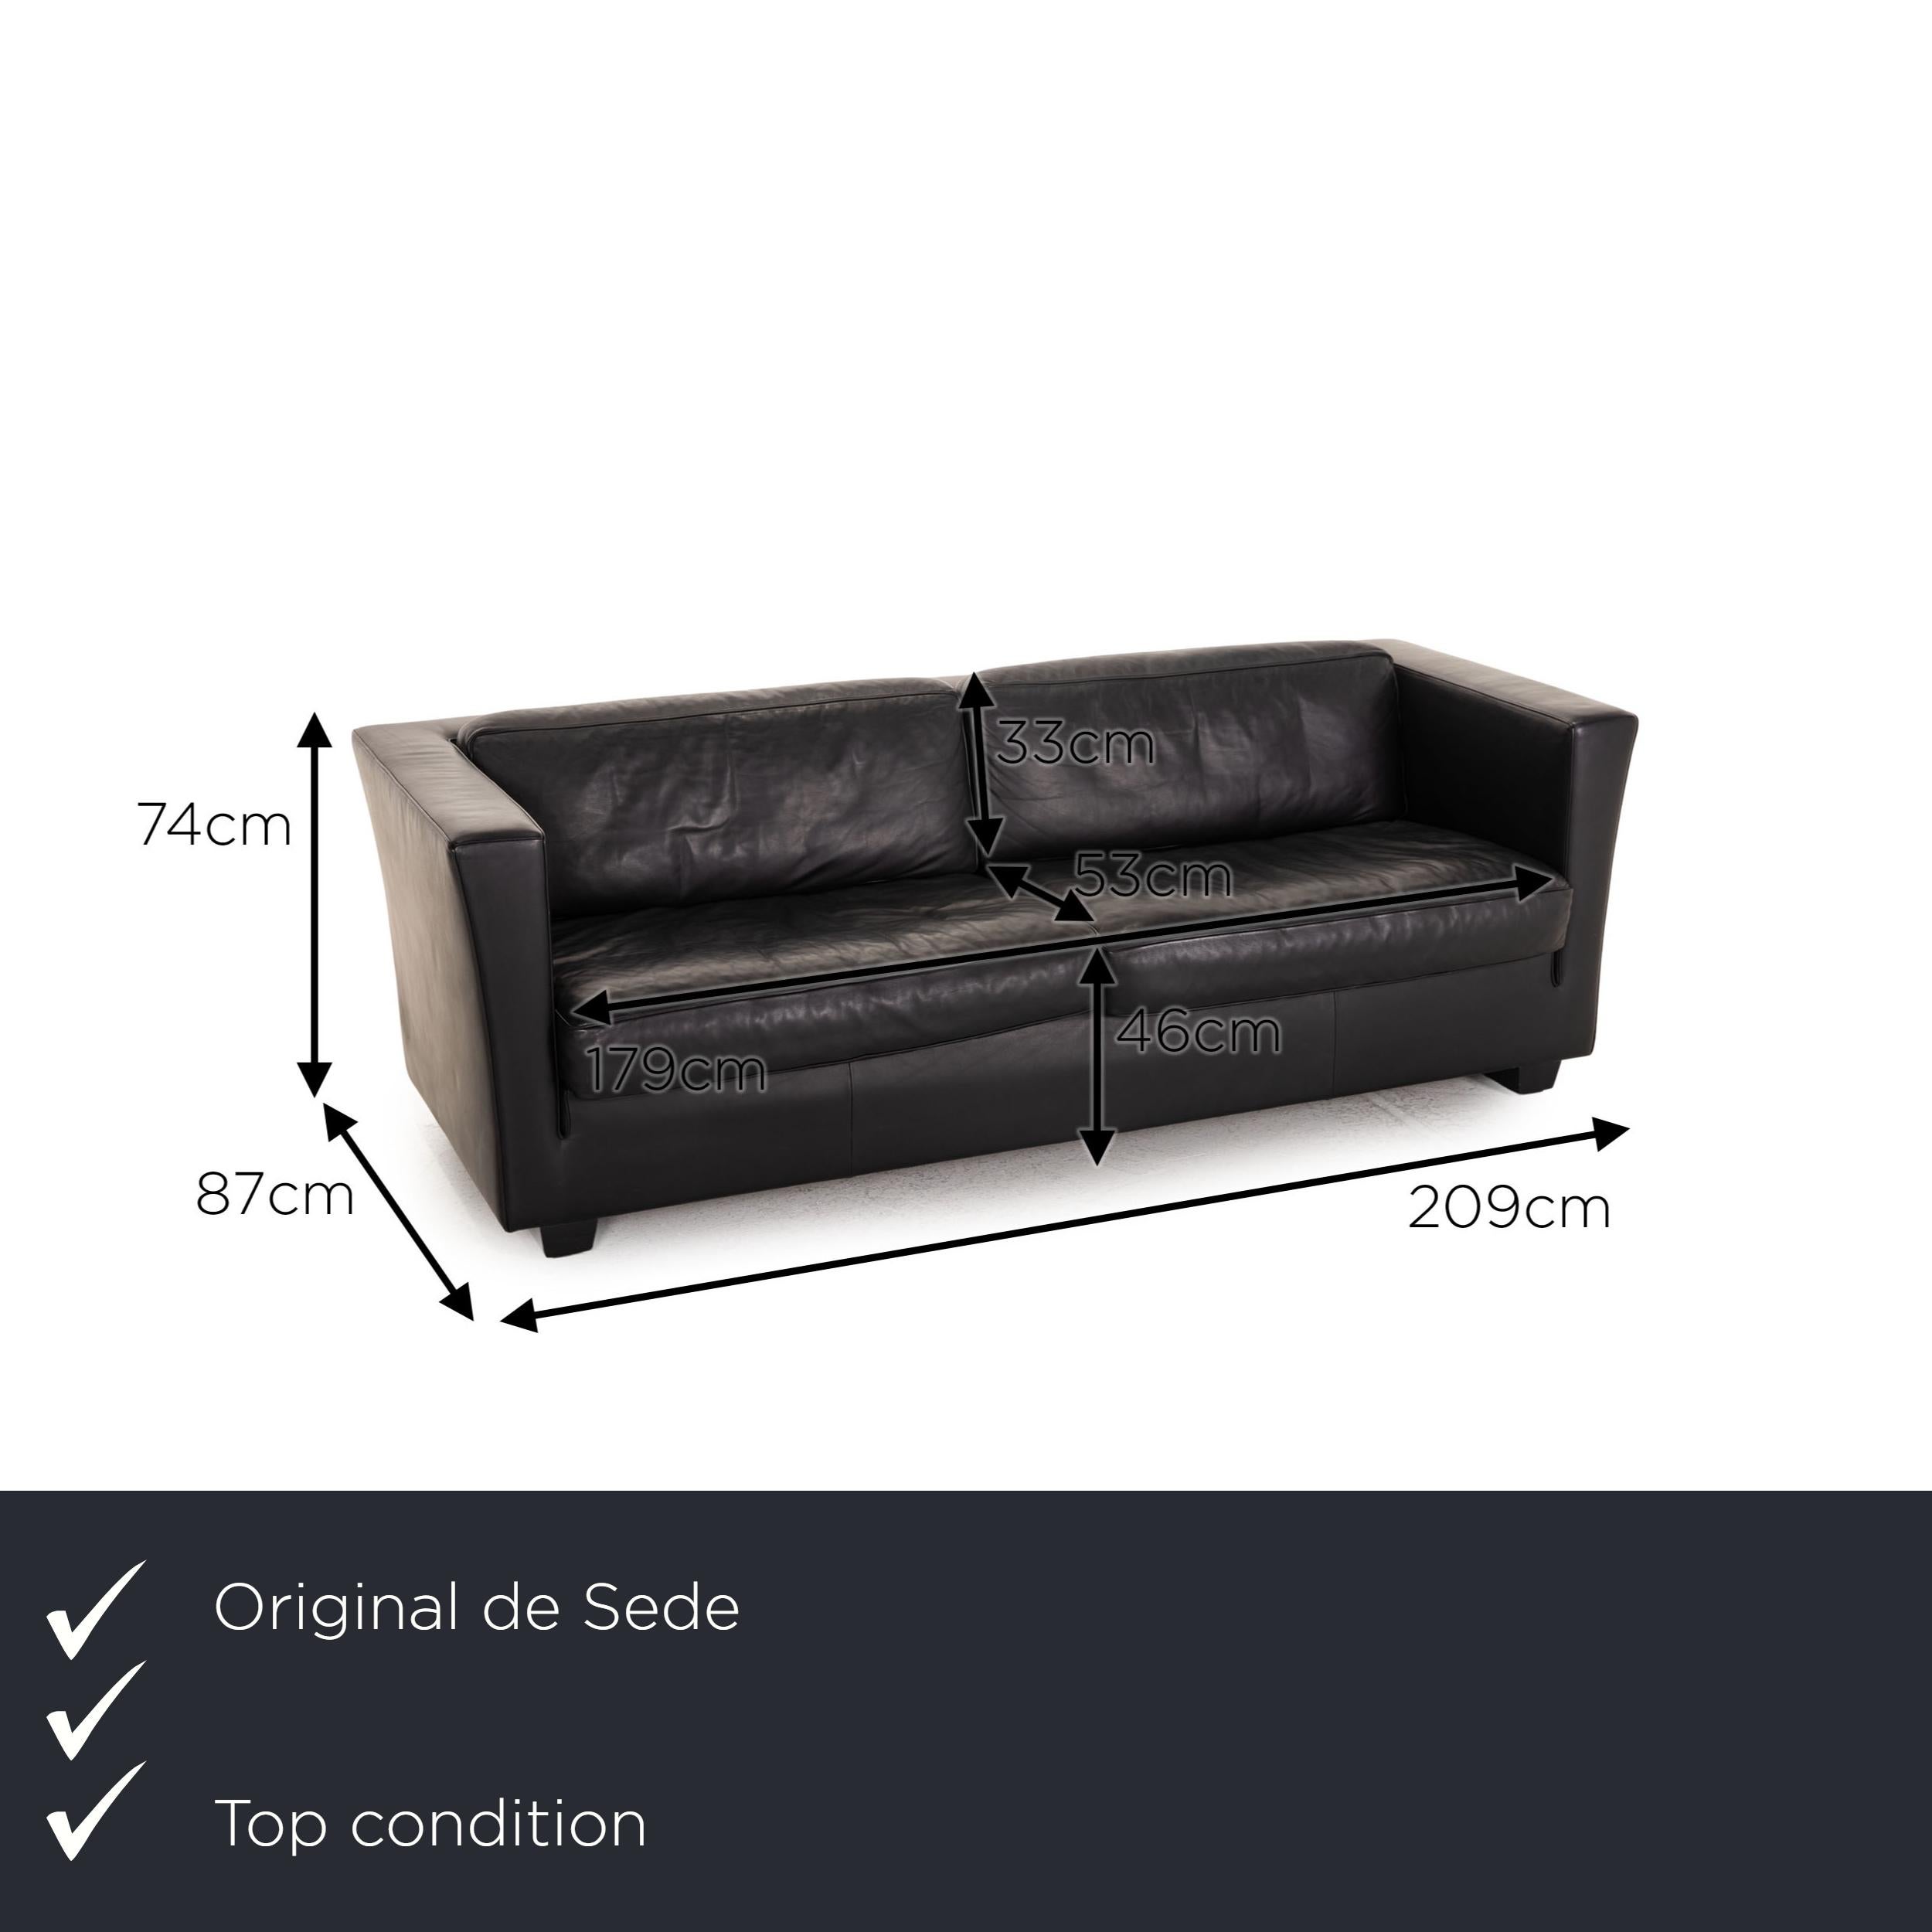 We present to you a de Sede lotus leather sofa black two-seater couch.

Product measurements in centimeters:

Depth: 87
Width: 209
Height: 74
Seat height: 46
Rest height: 74
Seat depth: 53
Seat width: 179
Back height: 33.

     